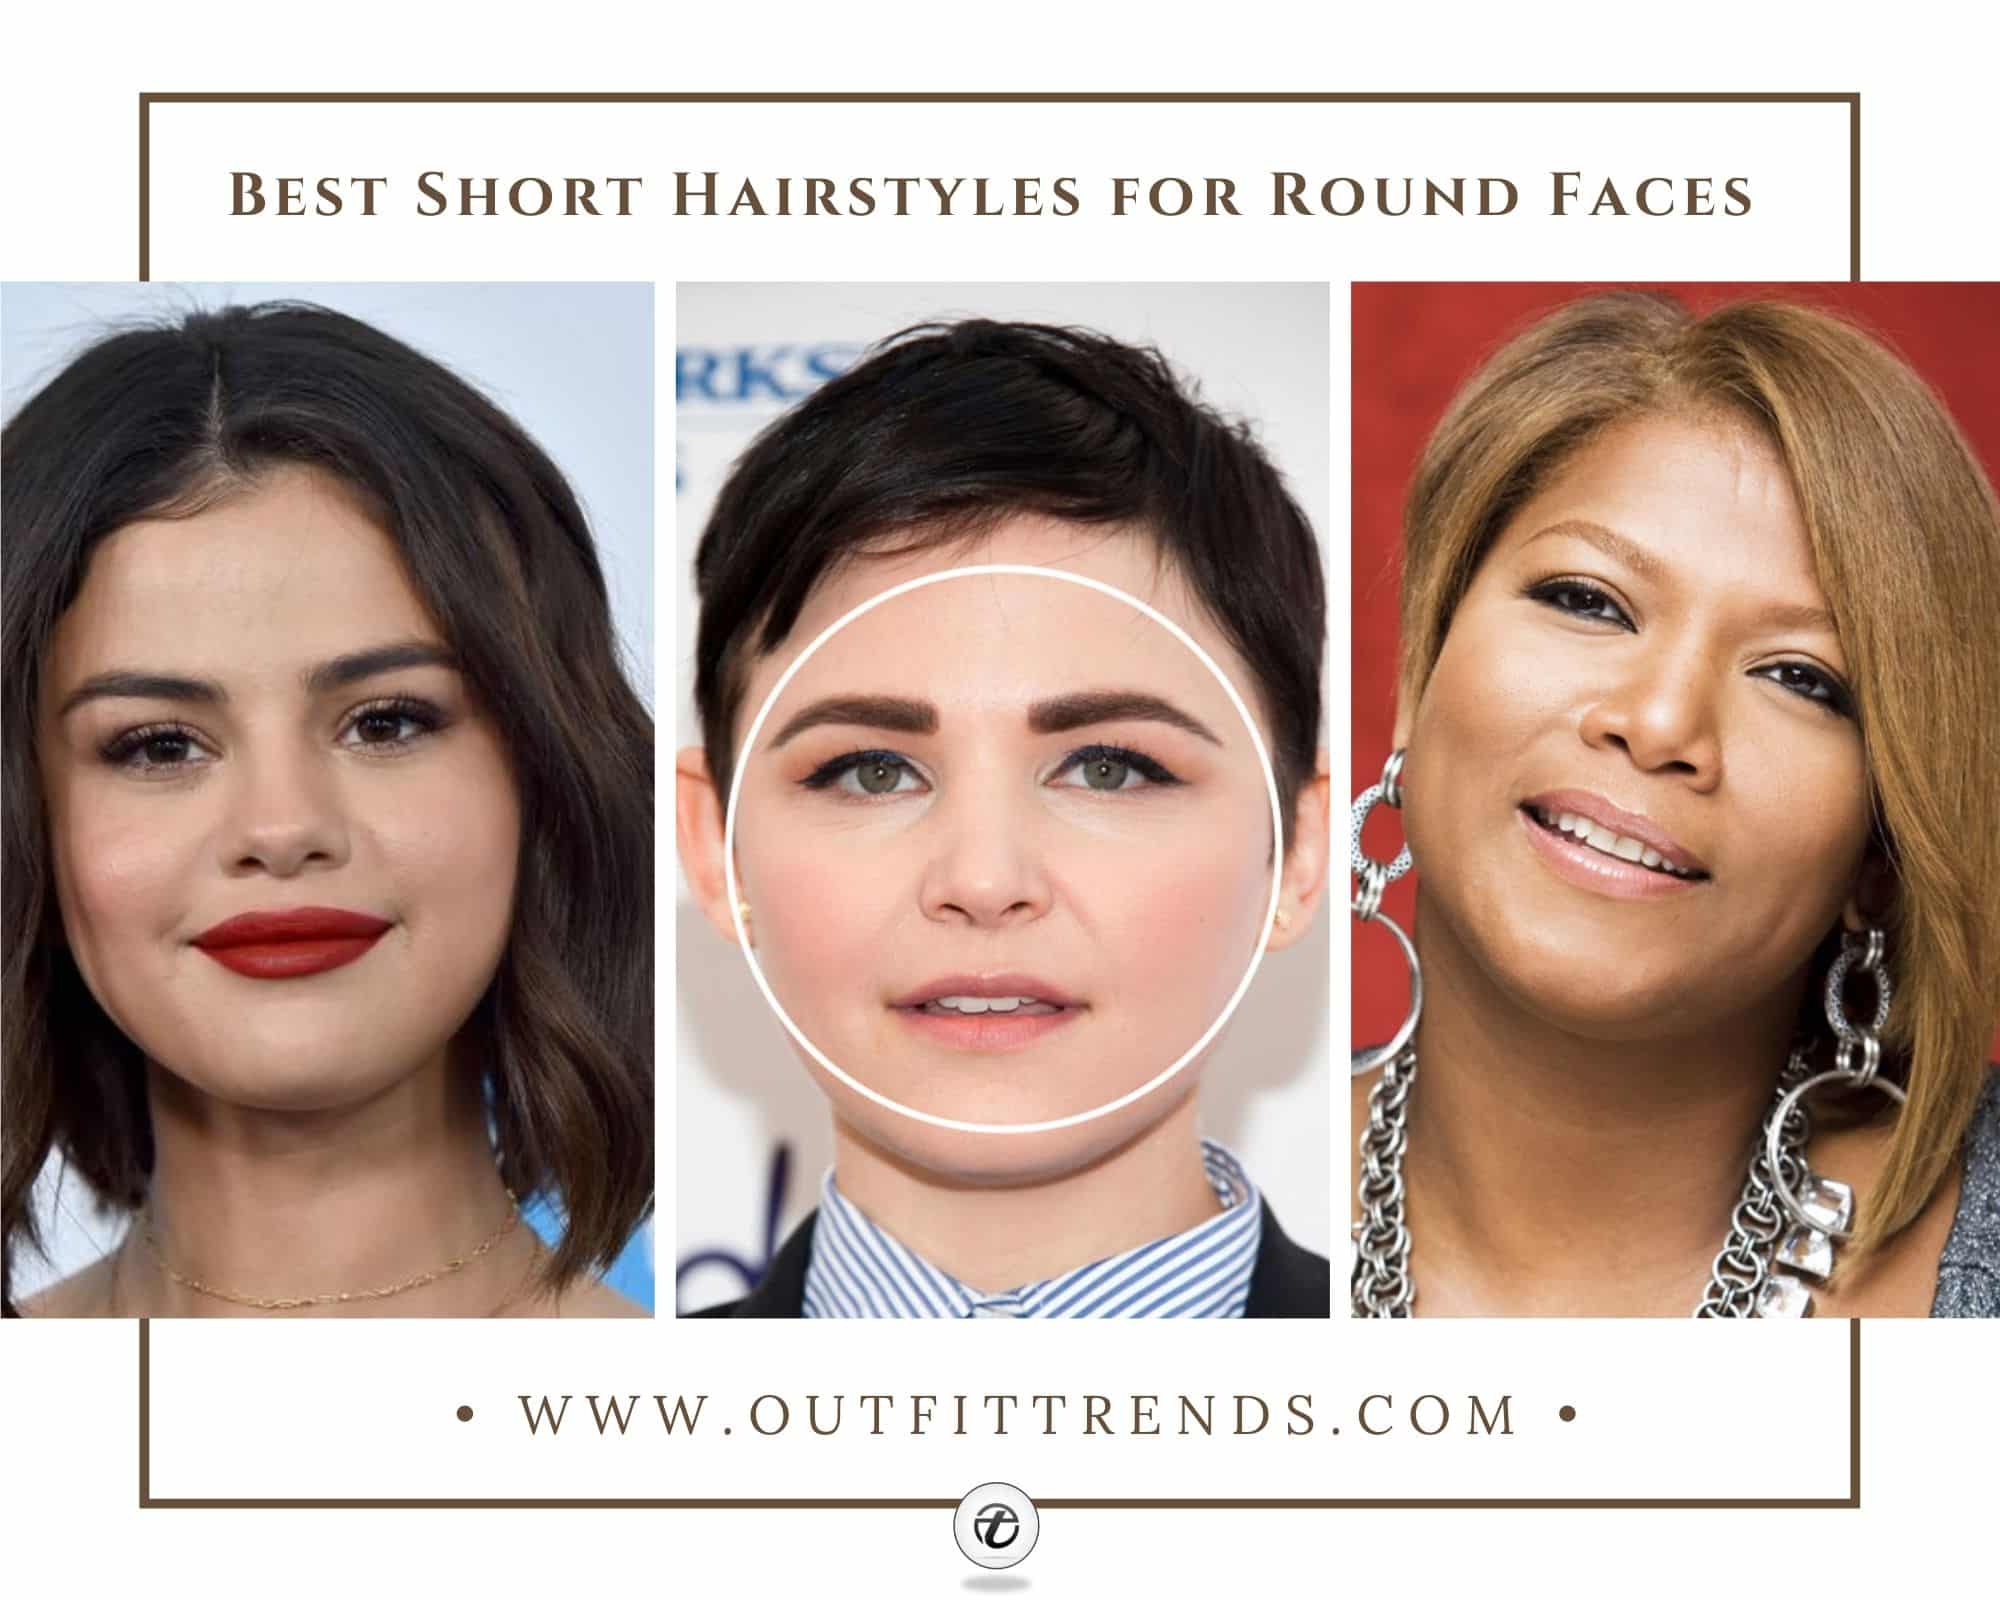 The 9 Best Haircuts for Round Faces According to Stylists  Allure